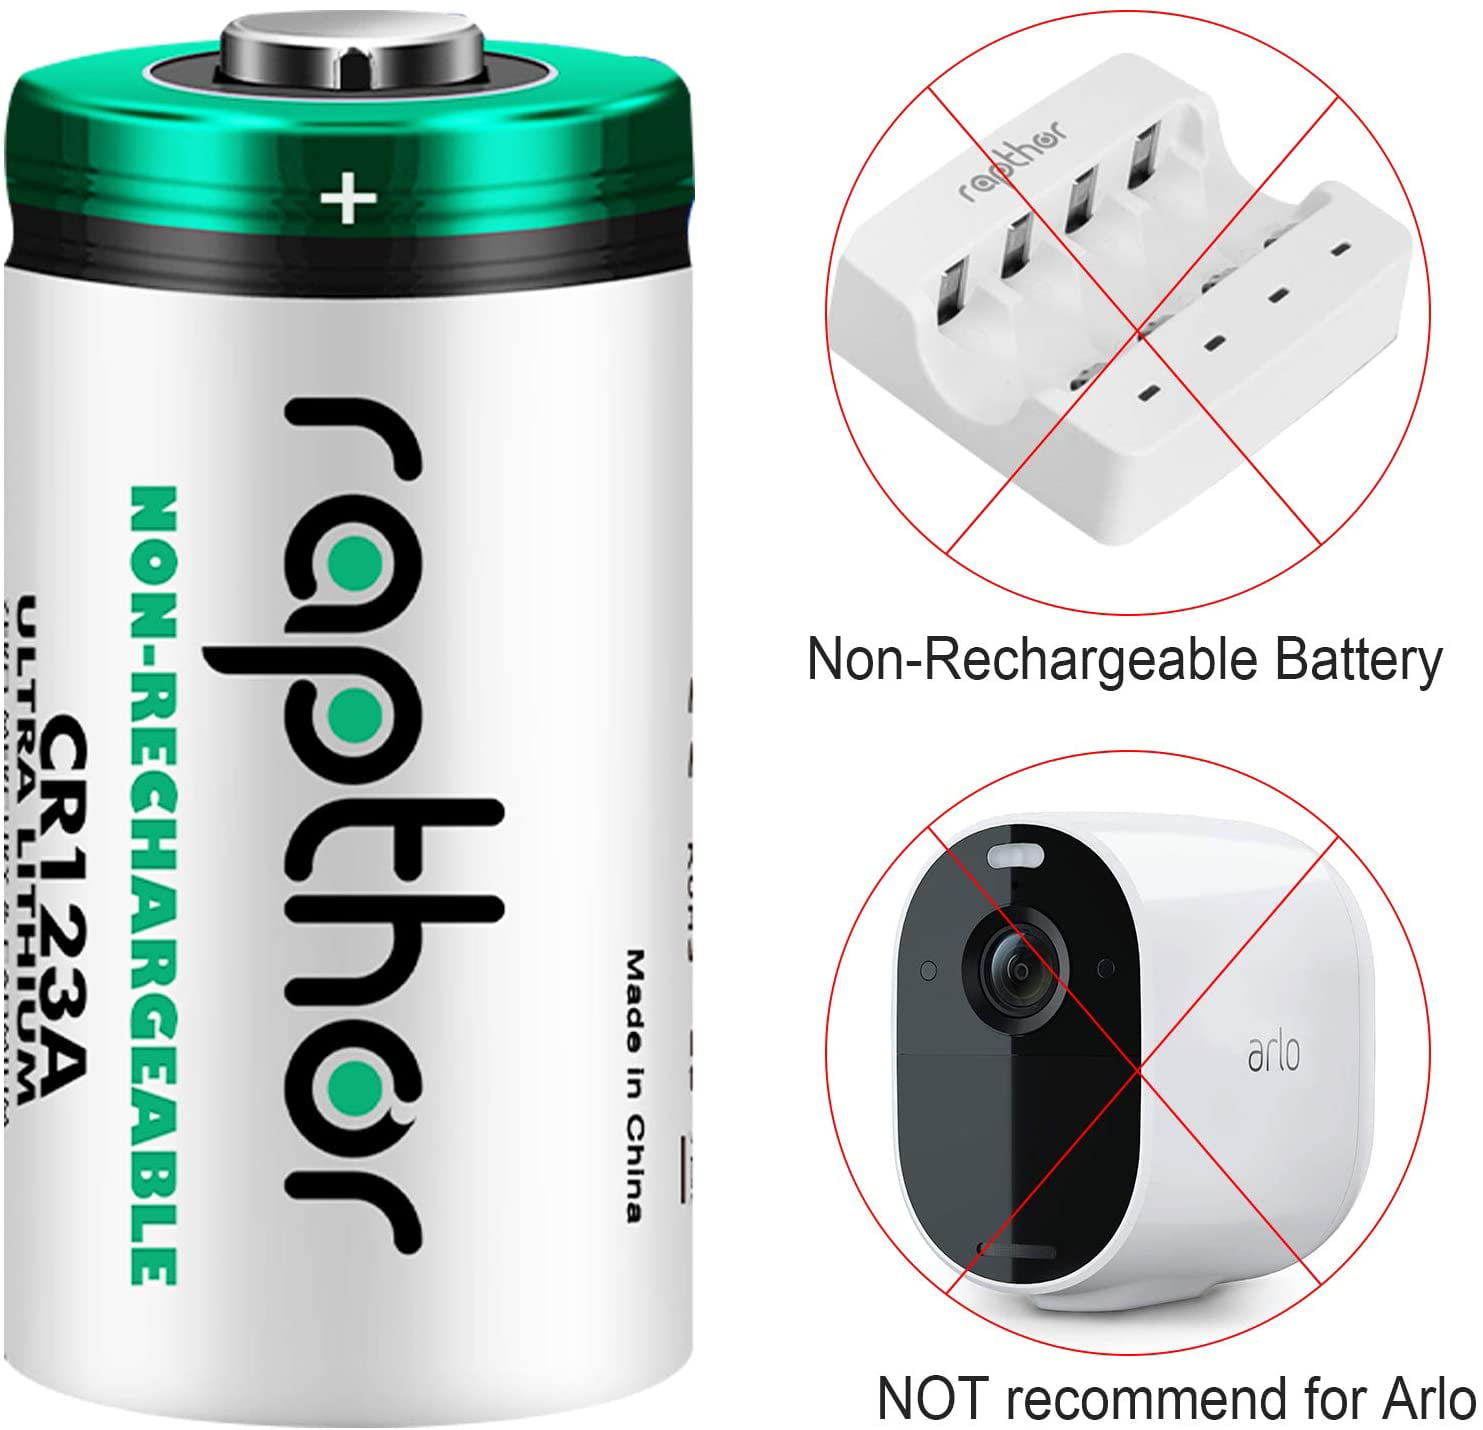 UL Certification for Flashlight Toys Alarm System etc Non-Rechargeable, NOT for Arlo CR123A Lithium Batteries 4 Pack 3V 1600mAh CR123 CR17345 Battery with 10-Year Shelf Life